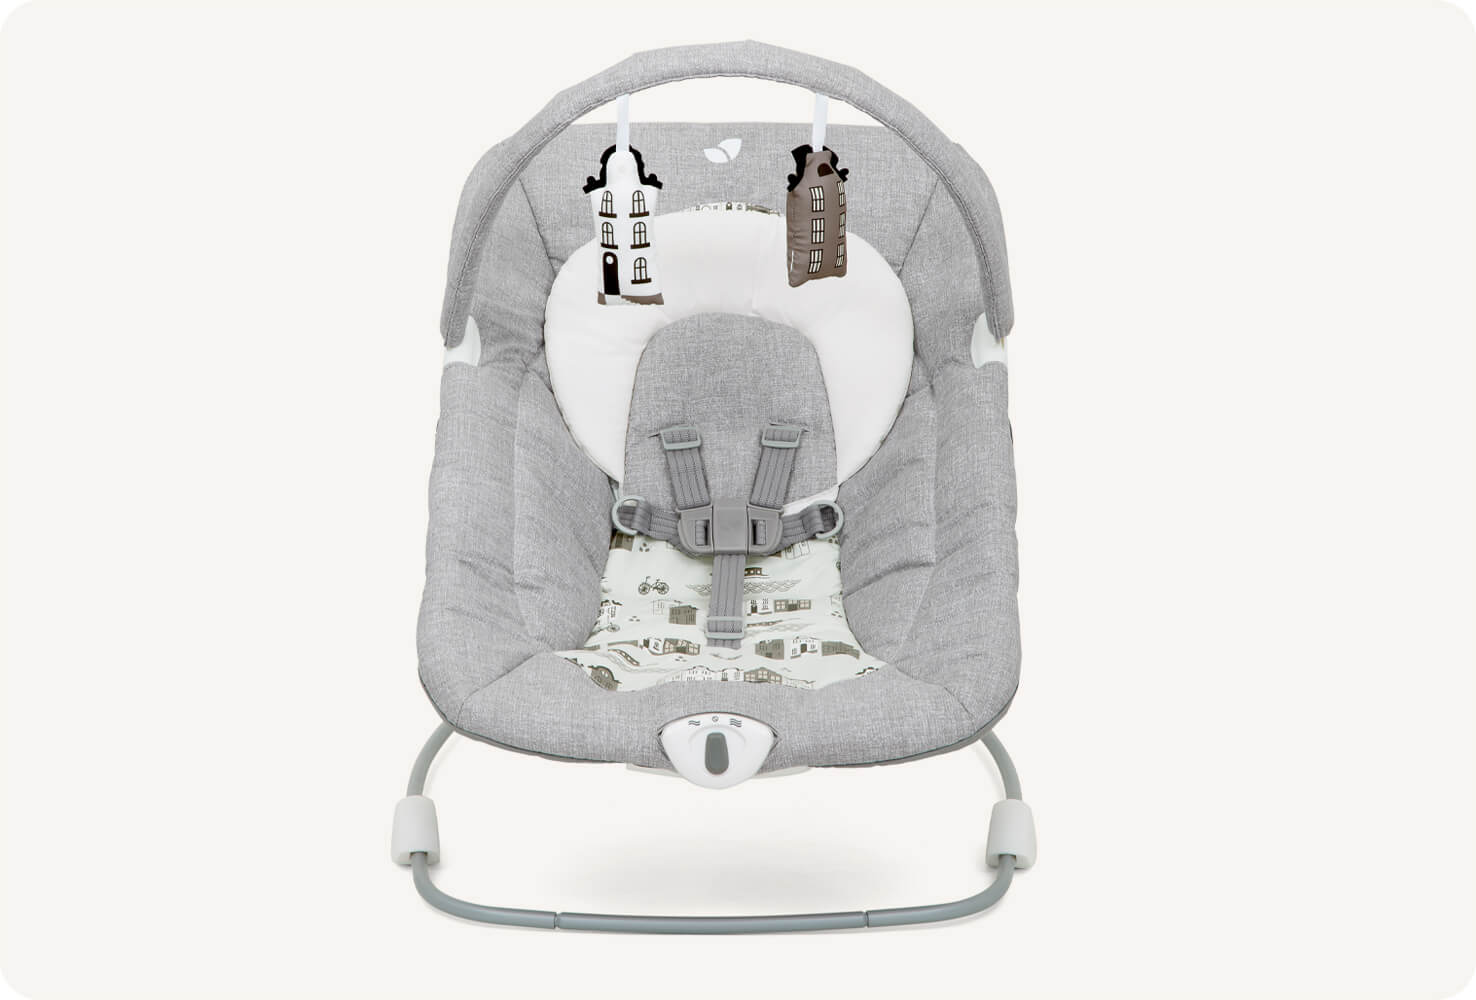   Frontal view of Joie light gray wish bouncer.